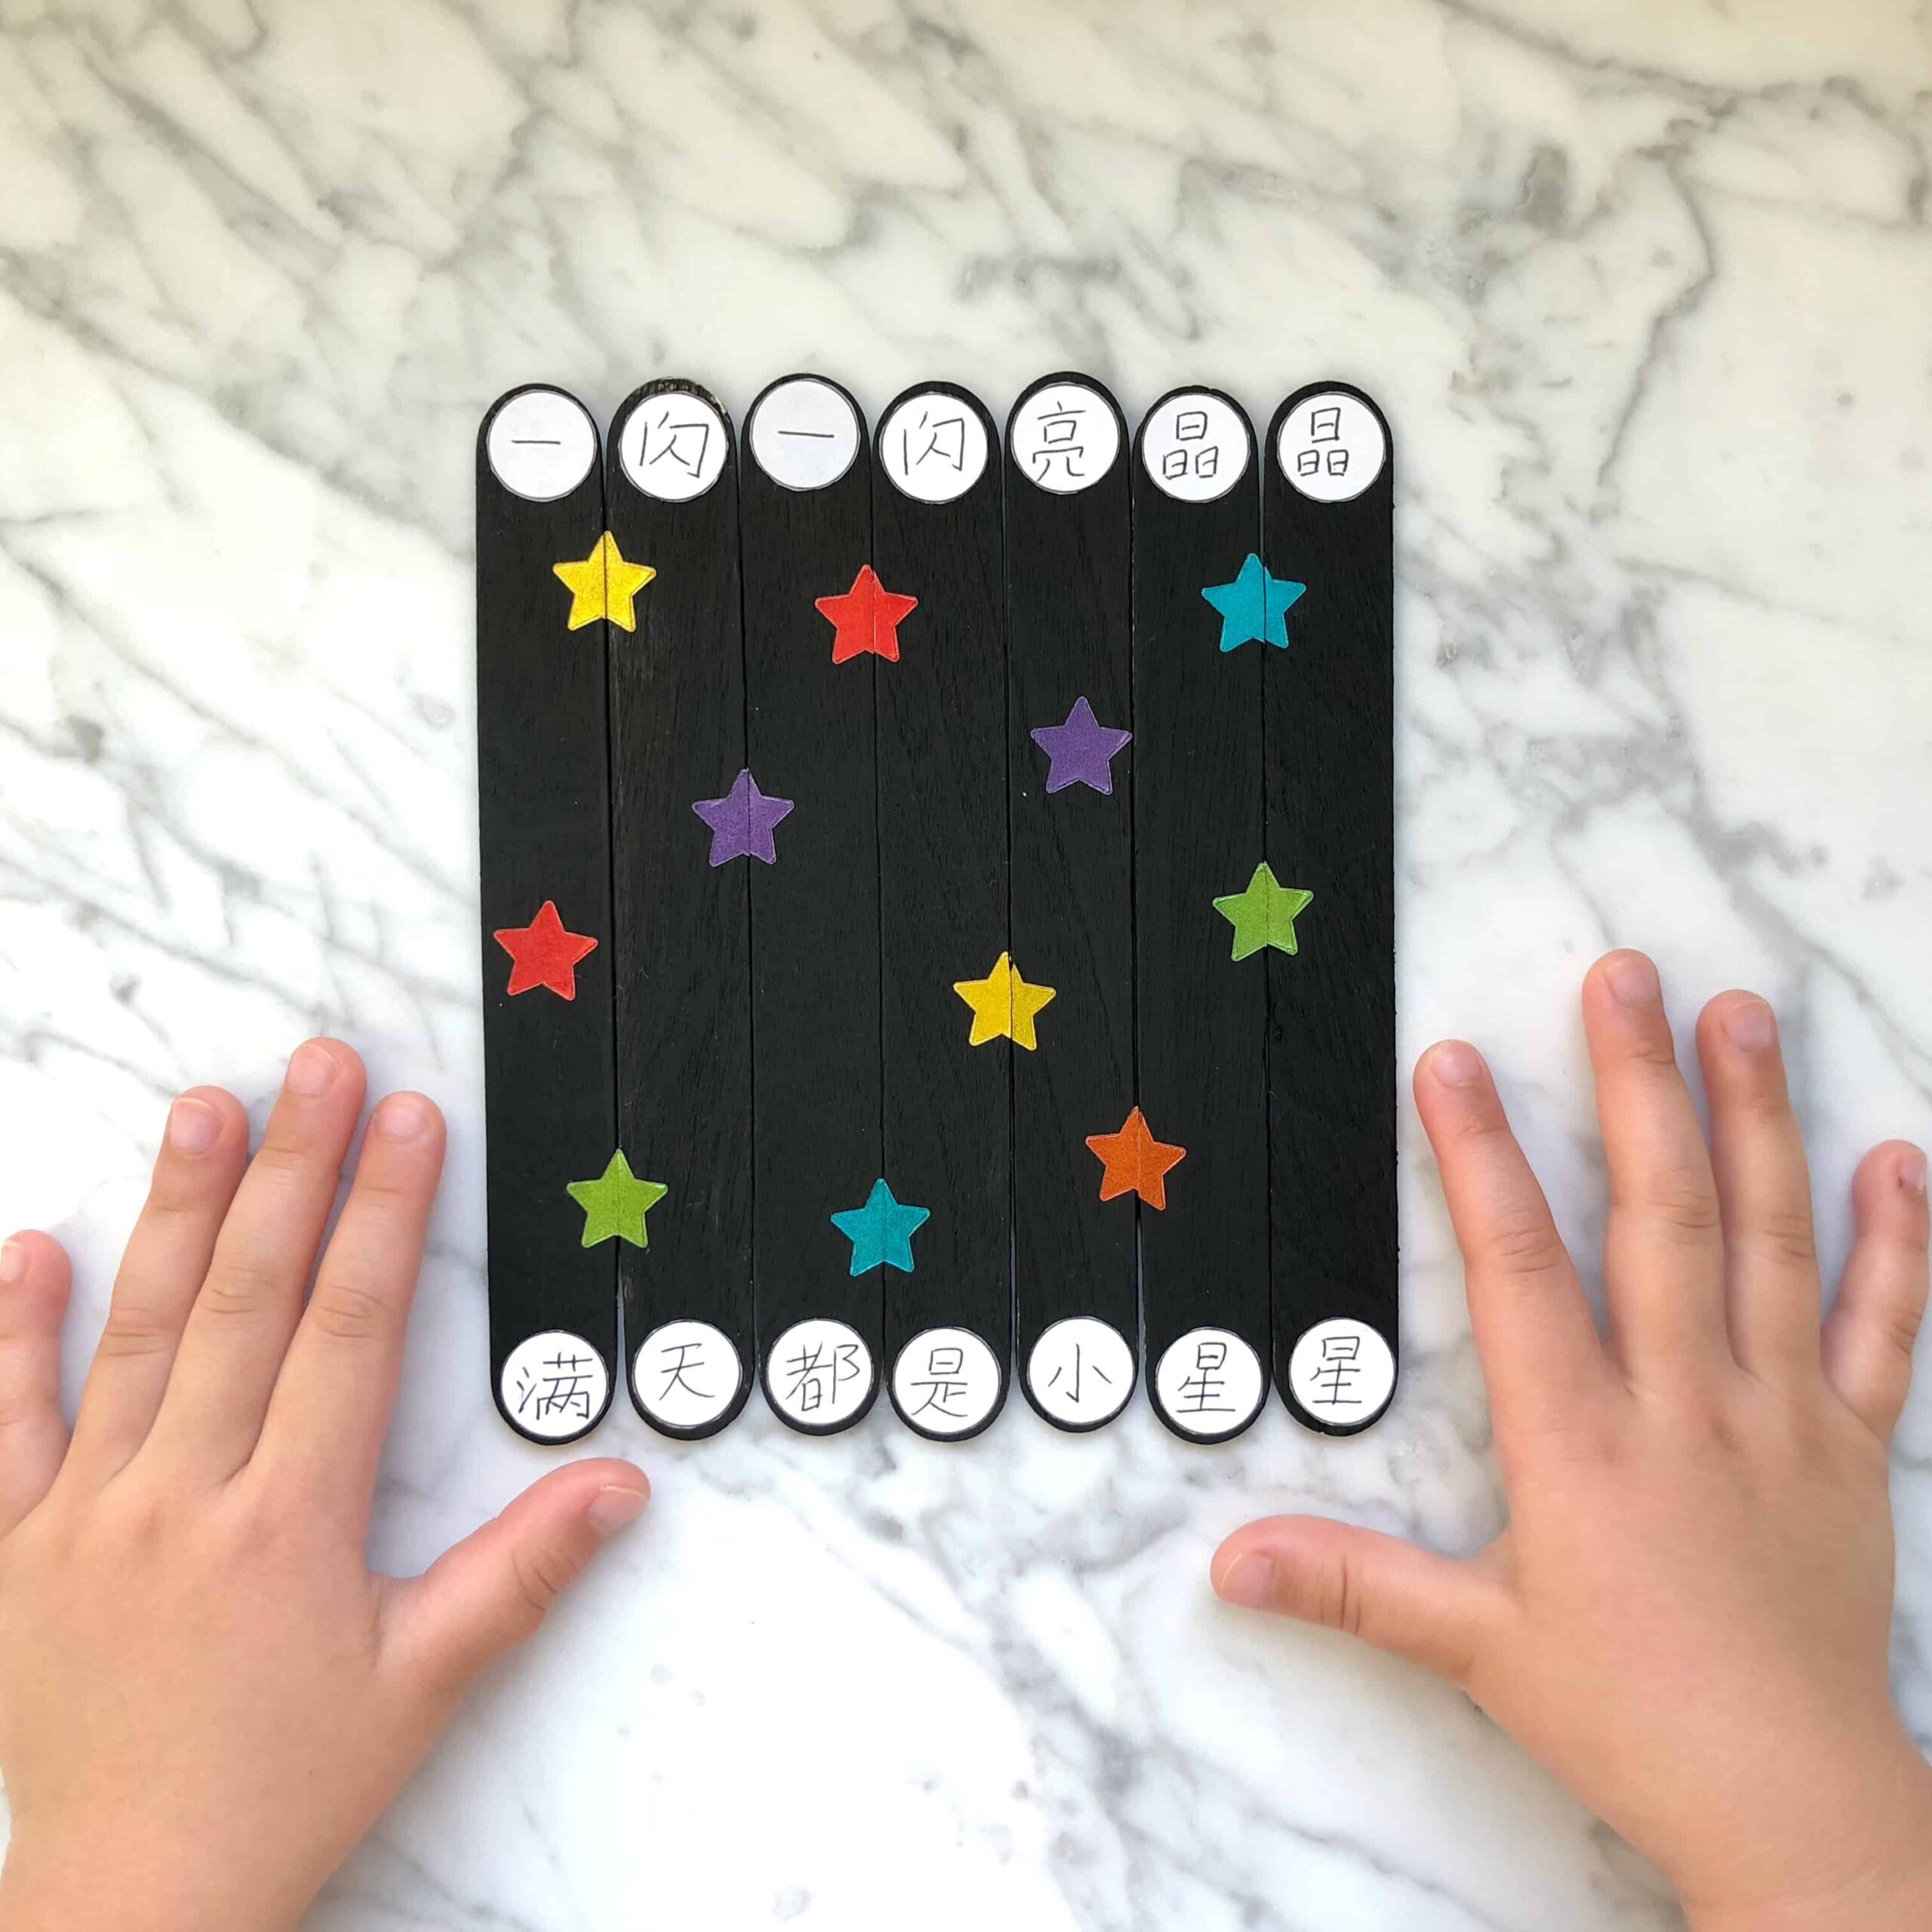 Chinese Twinkle Twinkle Little Star - Craft Stick Puzzles